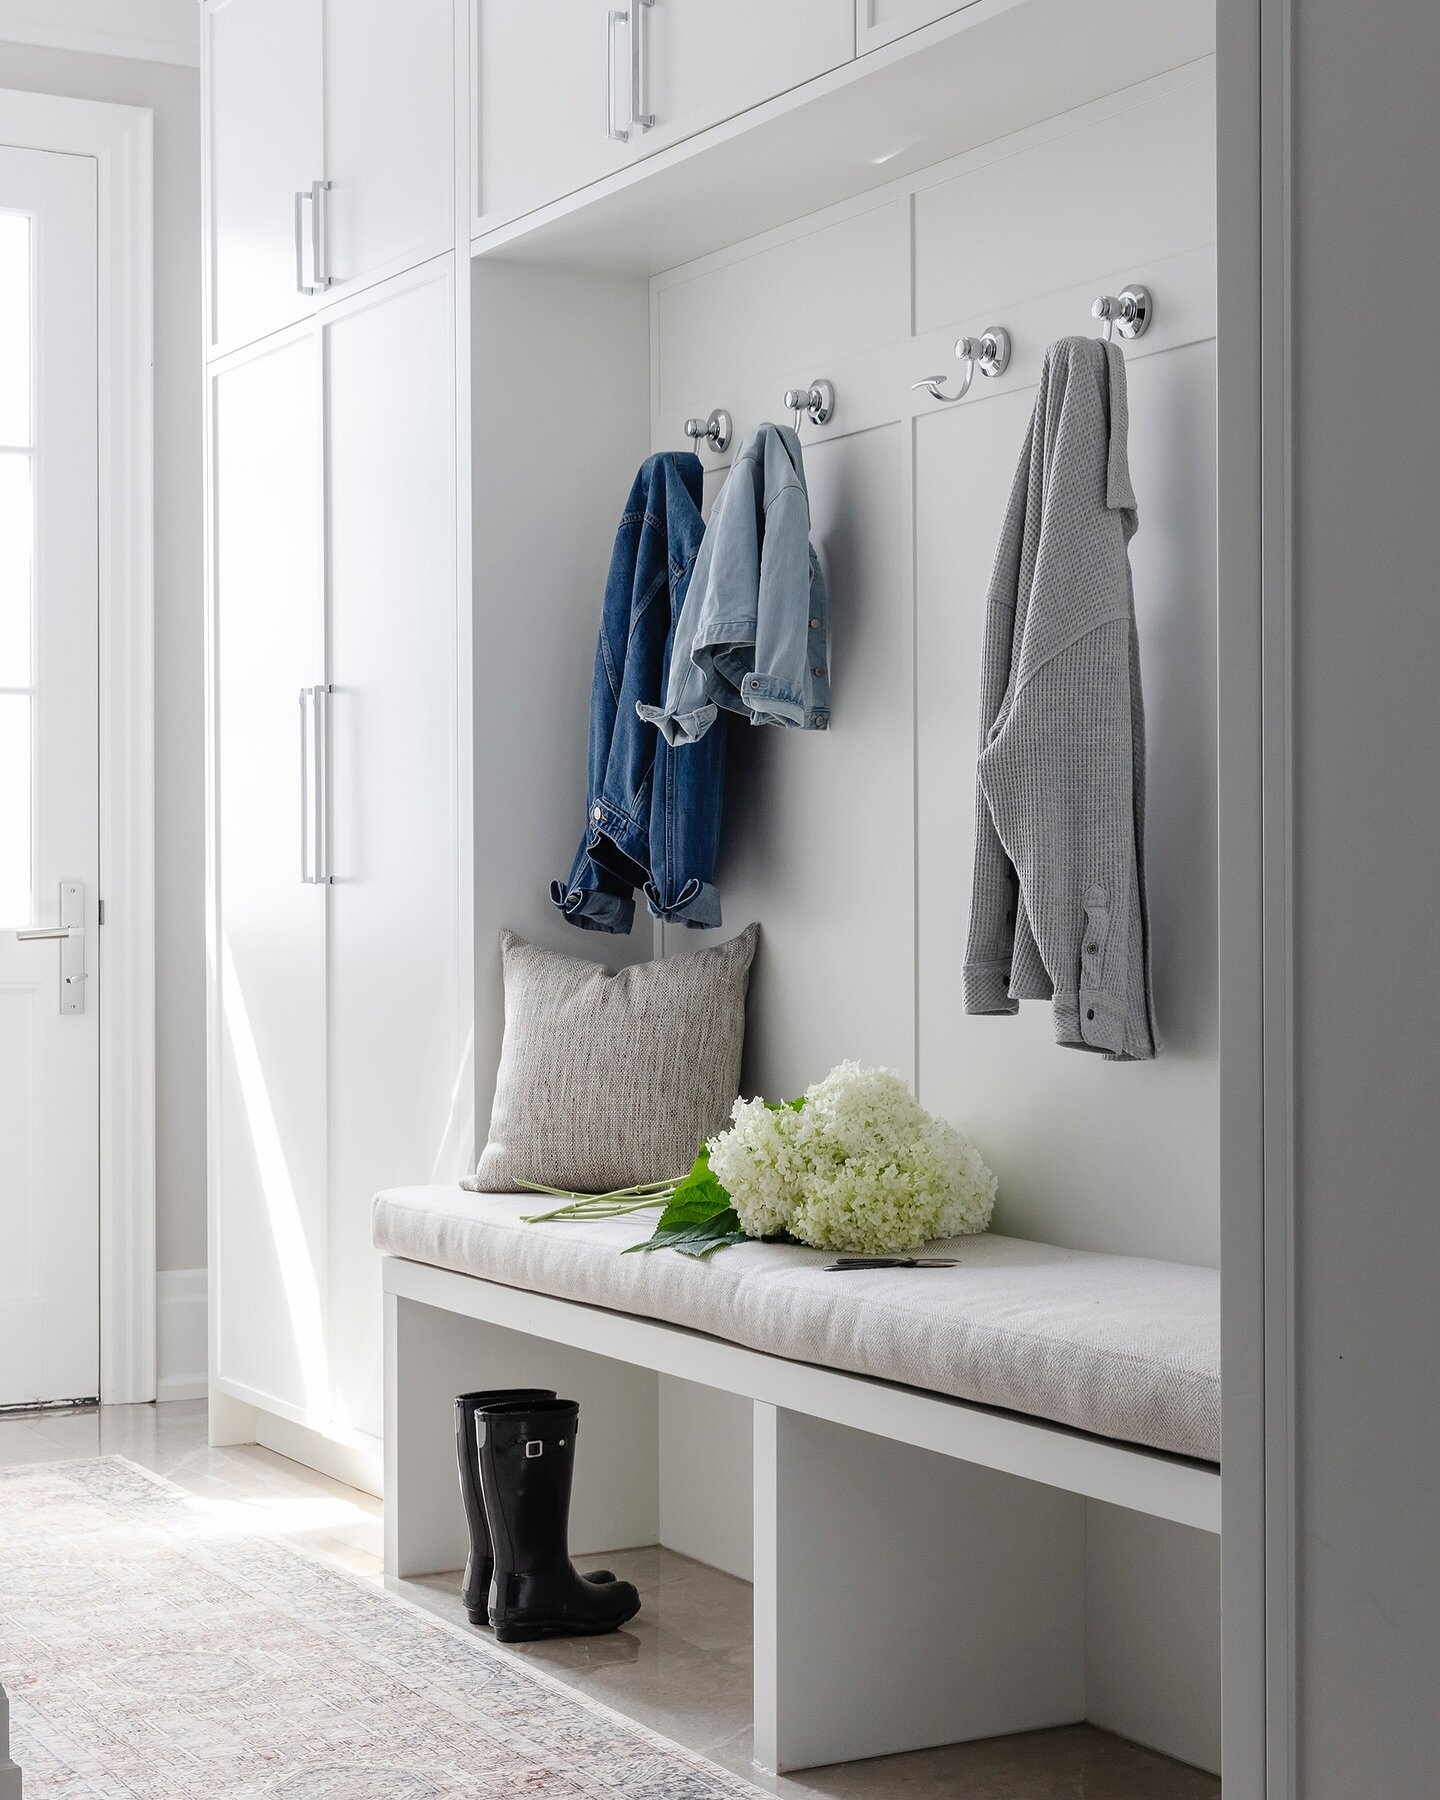 The Mudroom ~  We designed this space to be fresh and bright; to take everything a side entrance gives it, storage, function and beauty.

📸 @kerri.torrey | Design @karinkolbinteriors | Styling @cat_therrien | Project Tecumseh Park Dr

#mudroomdesign